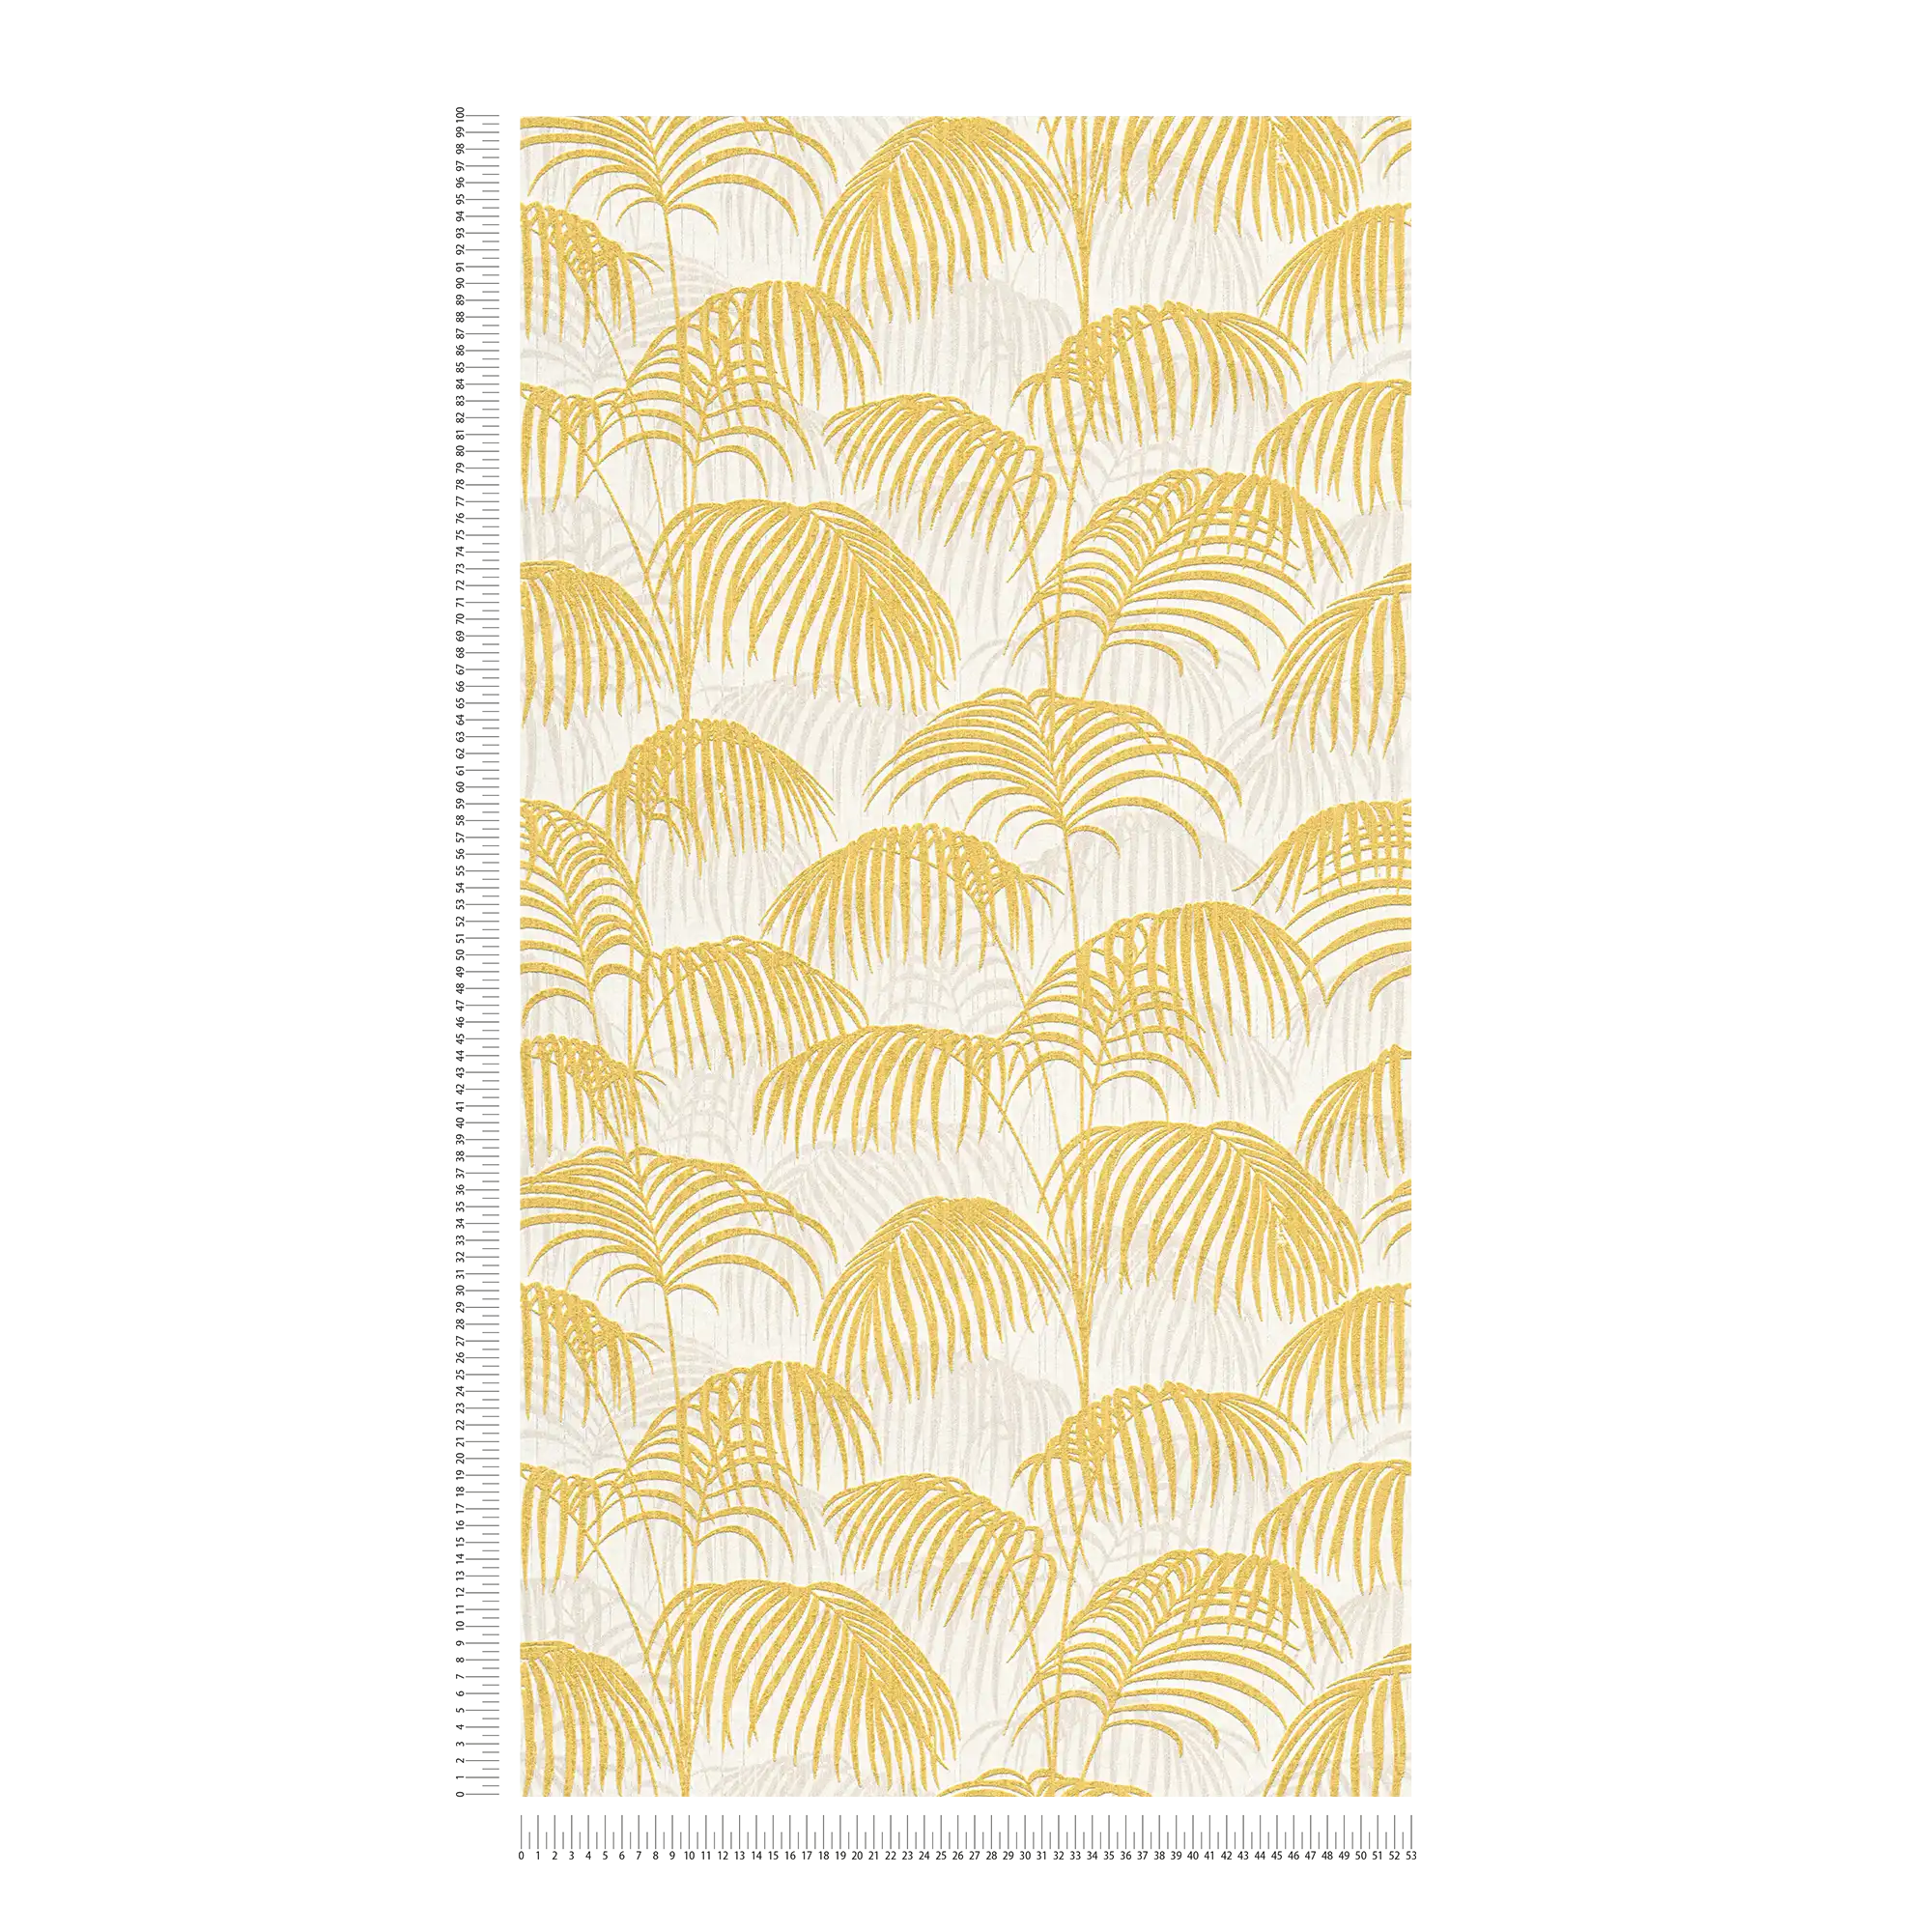             Palm wallpaper with gold effect & structure design - metallic, white
        